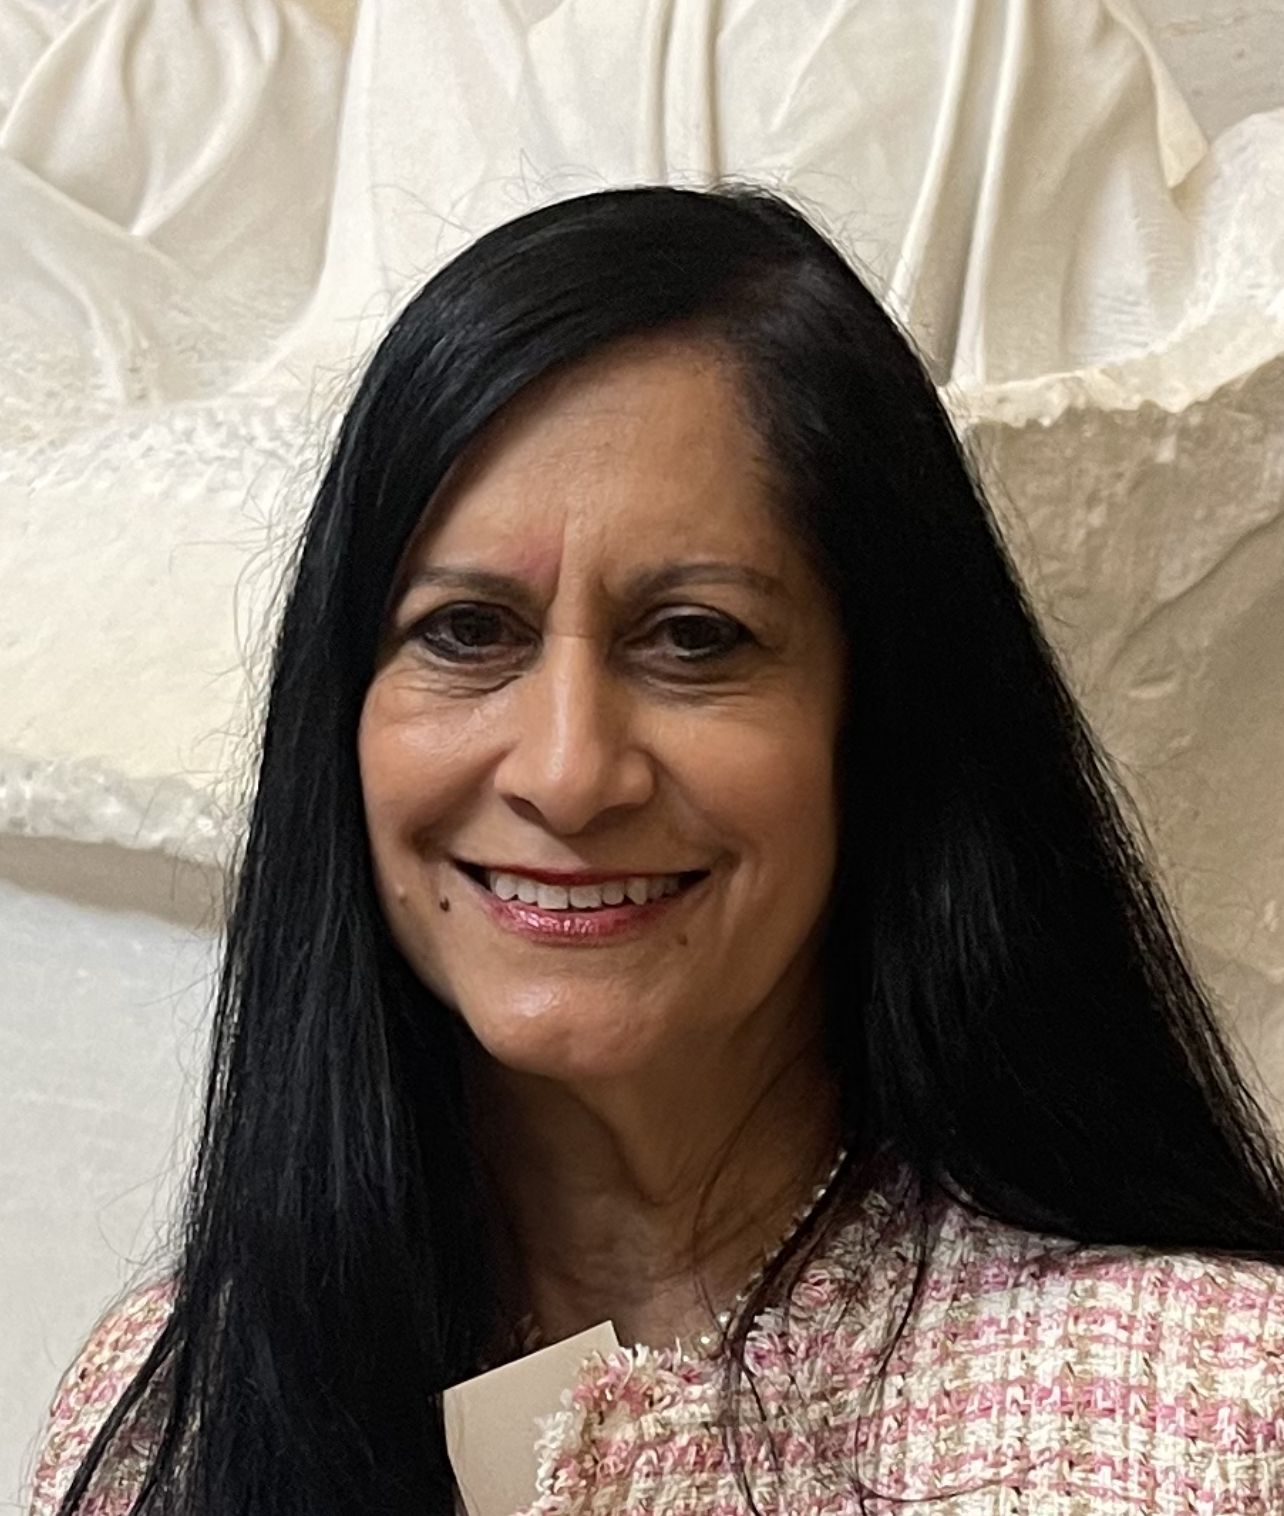 A photo of a woman with long straight black hair, smiling